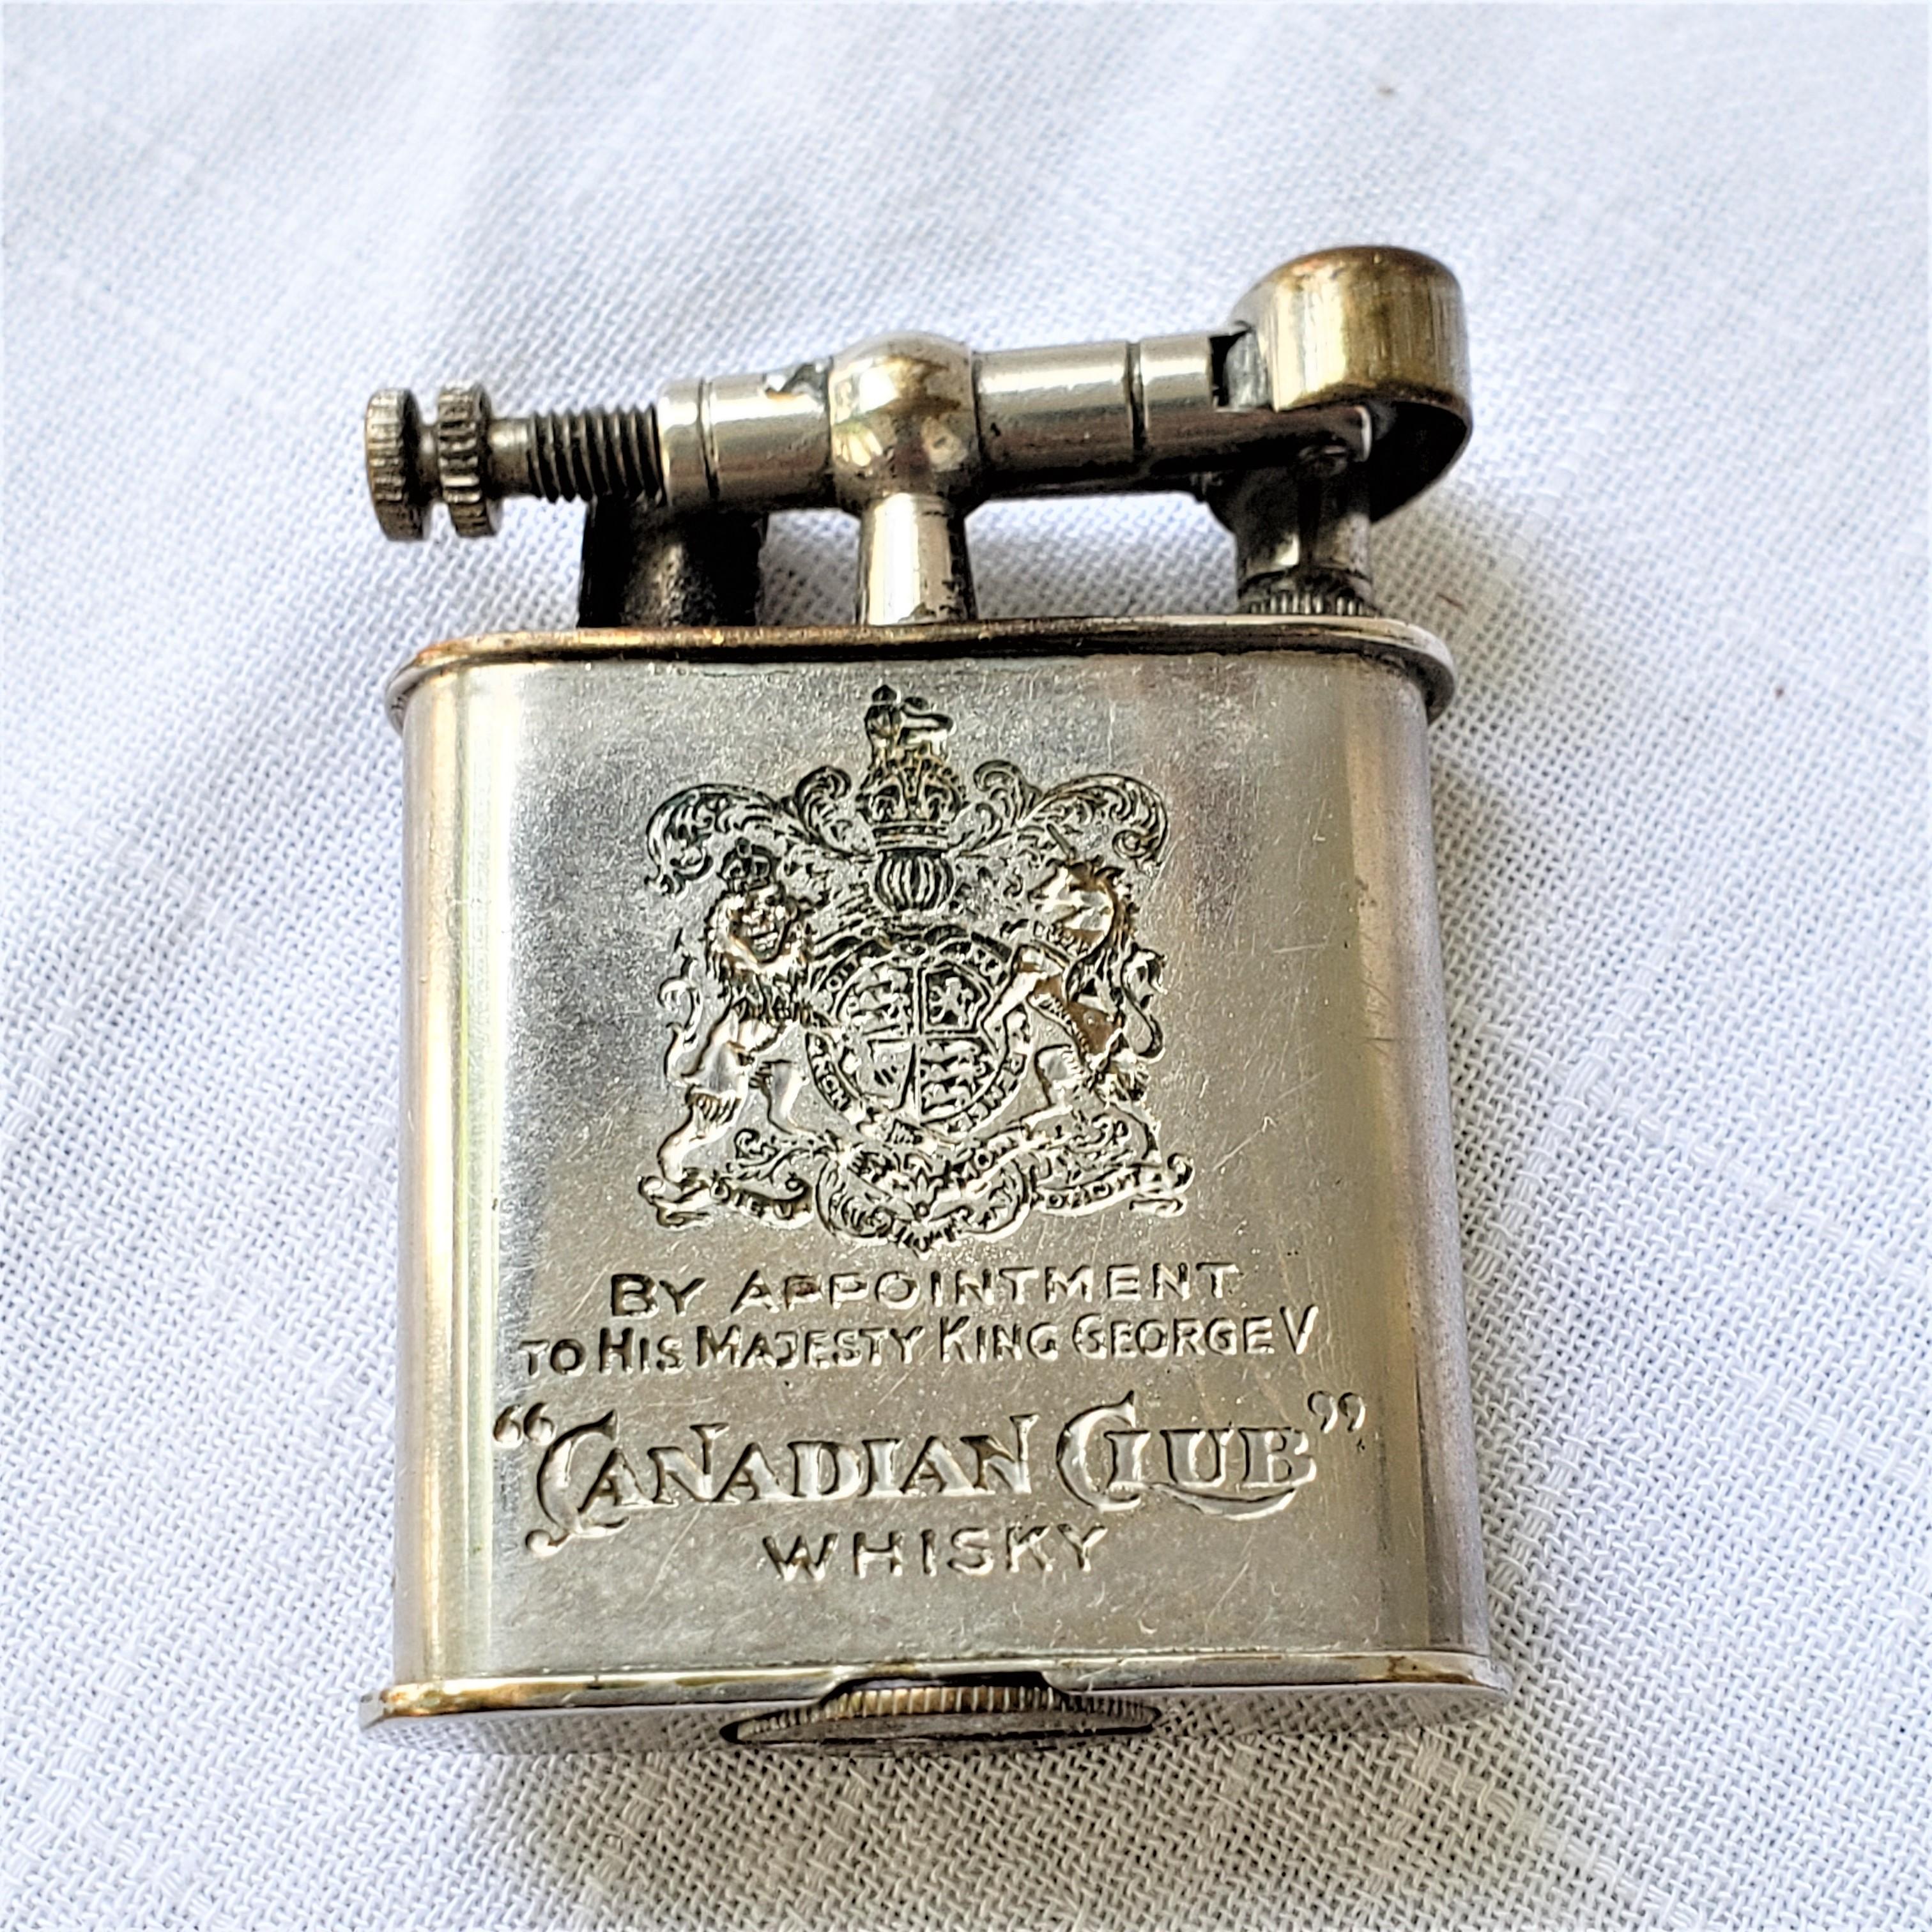 German Pair of Antique Canadian Club Whiskey Advertising Swing Arm Pocket Lighters For Sale